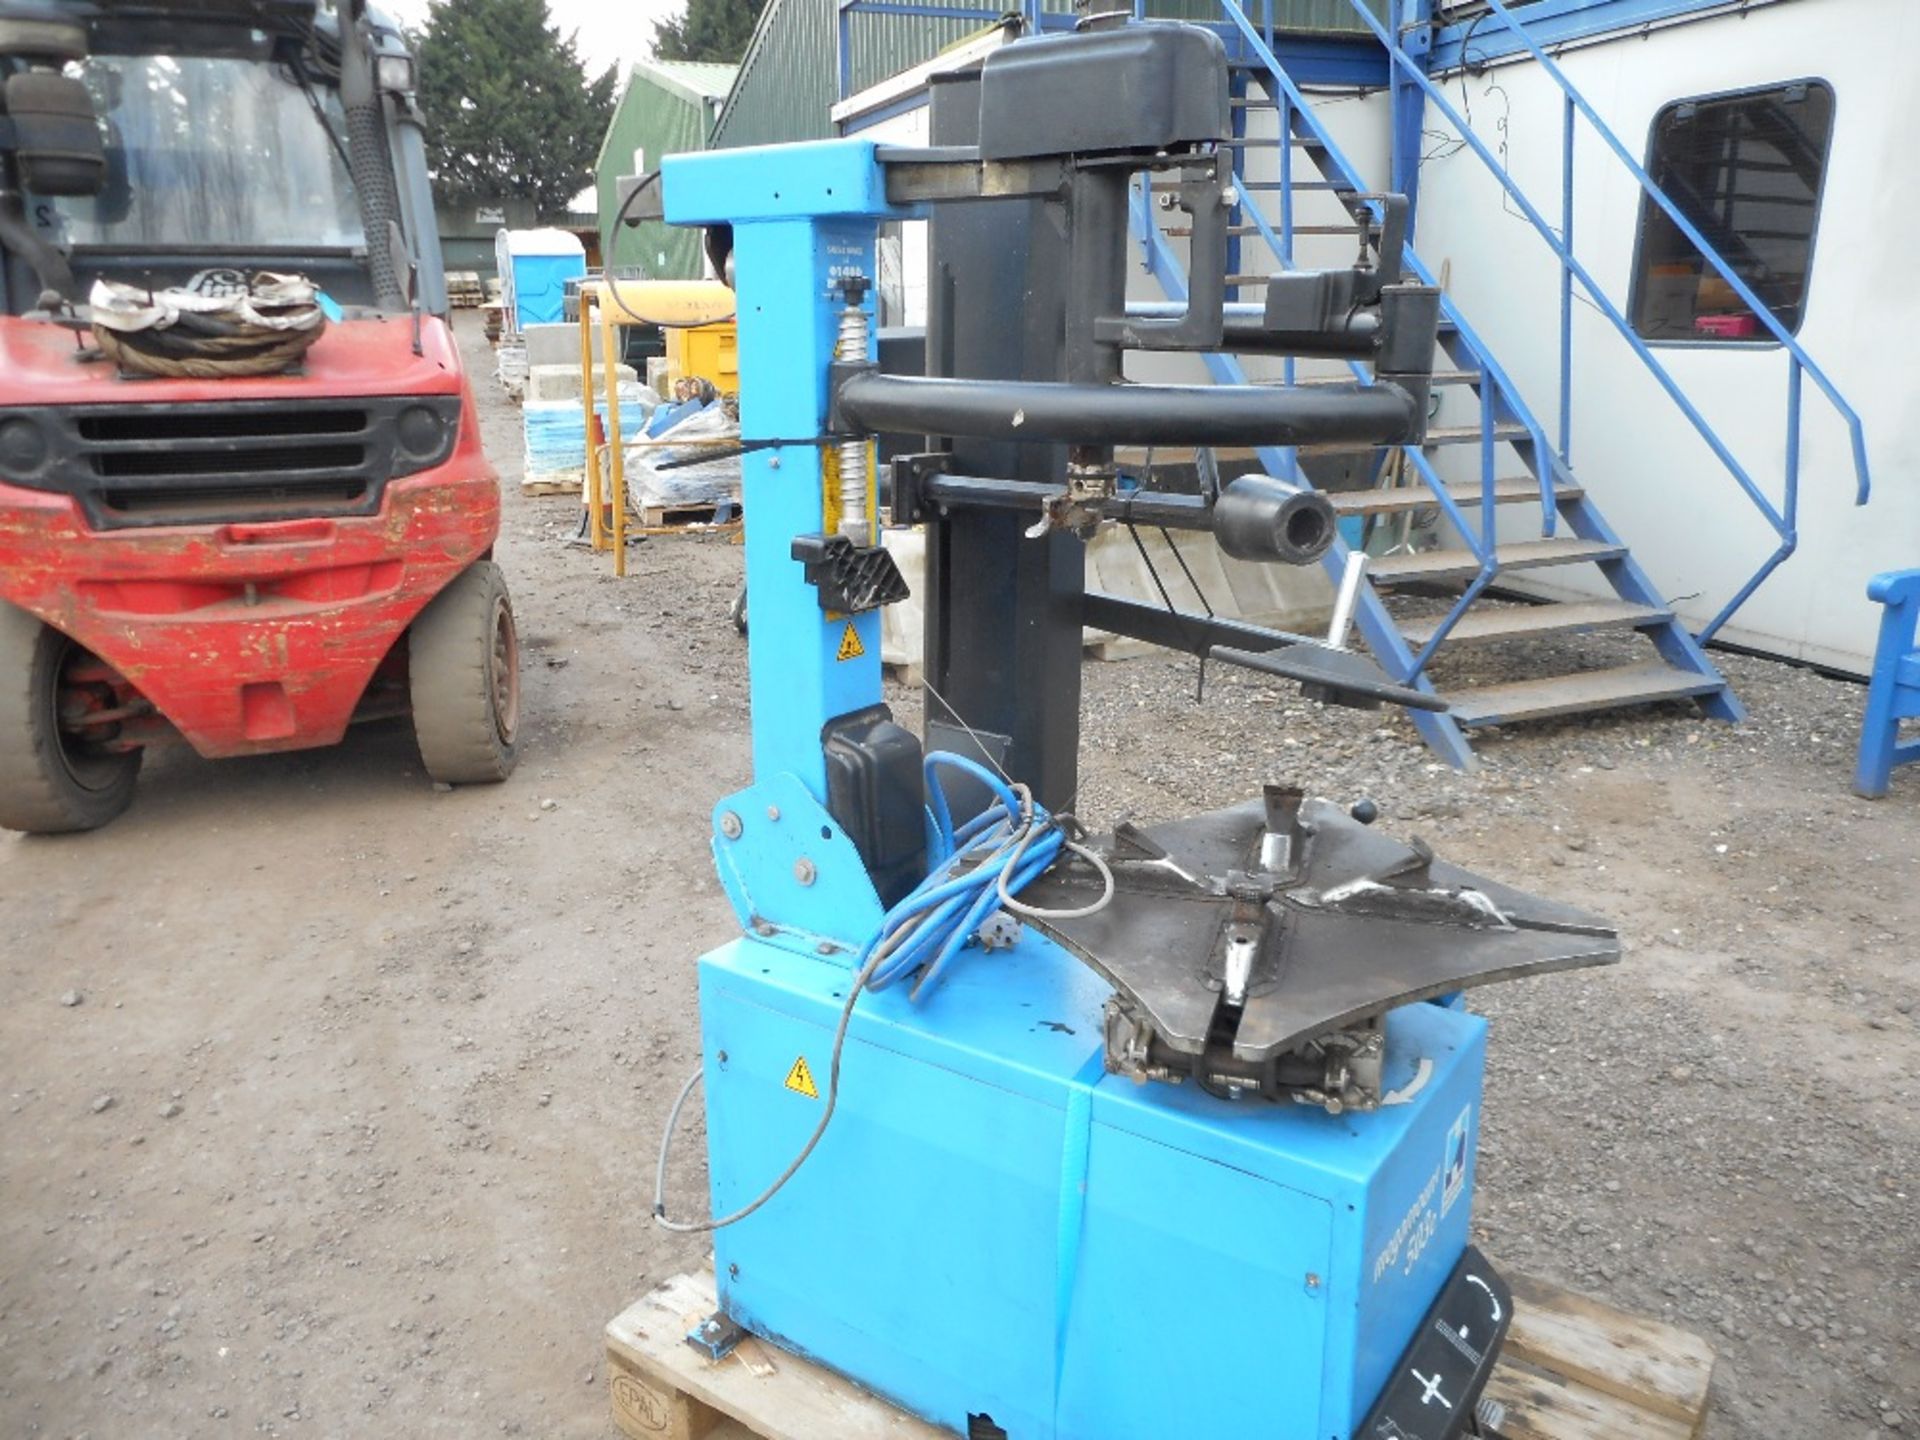 Hofmann tyre remover and wheel balancer - Image 11 of 11